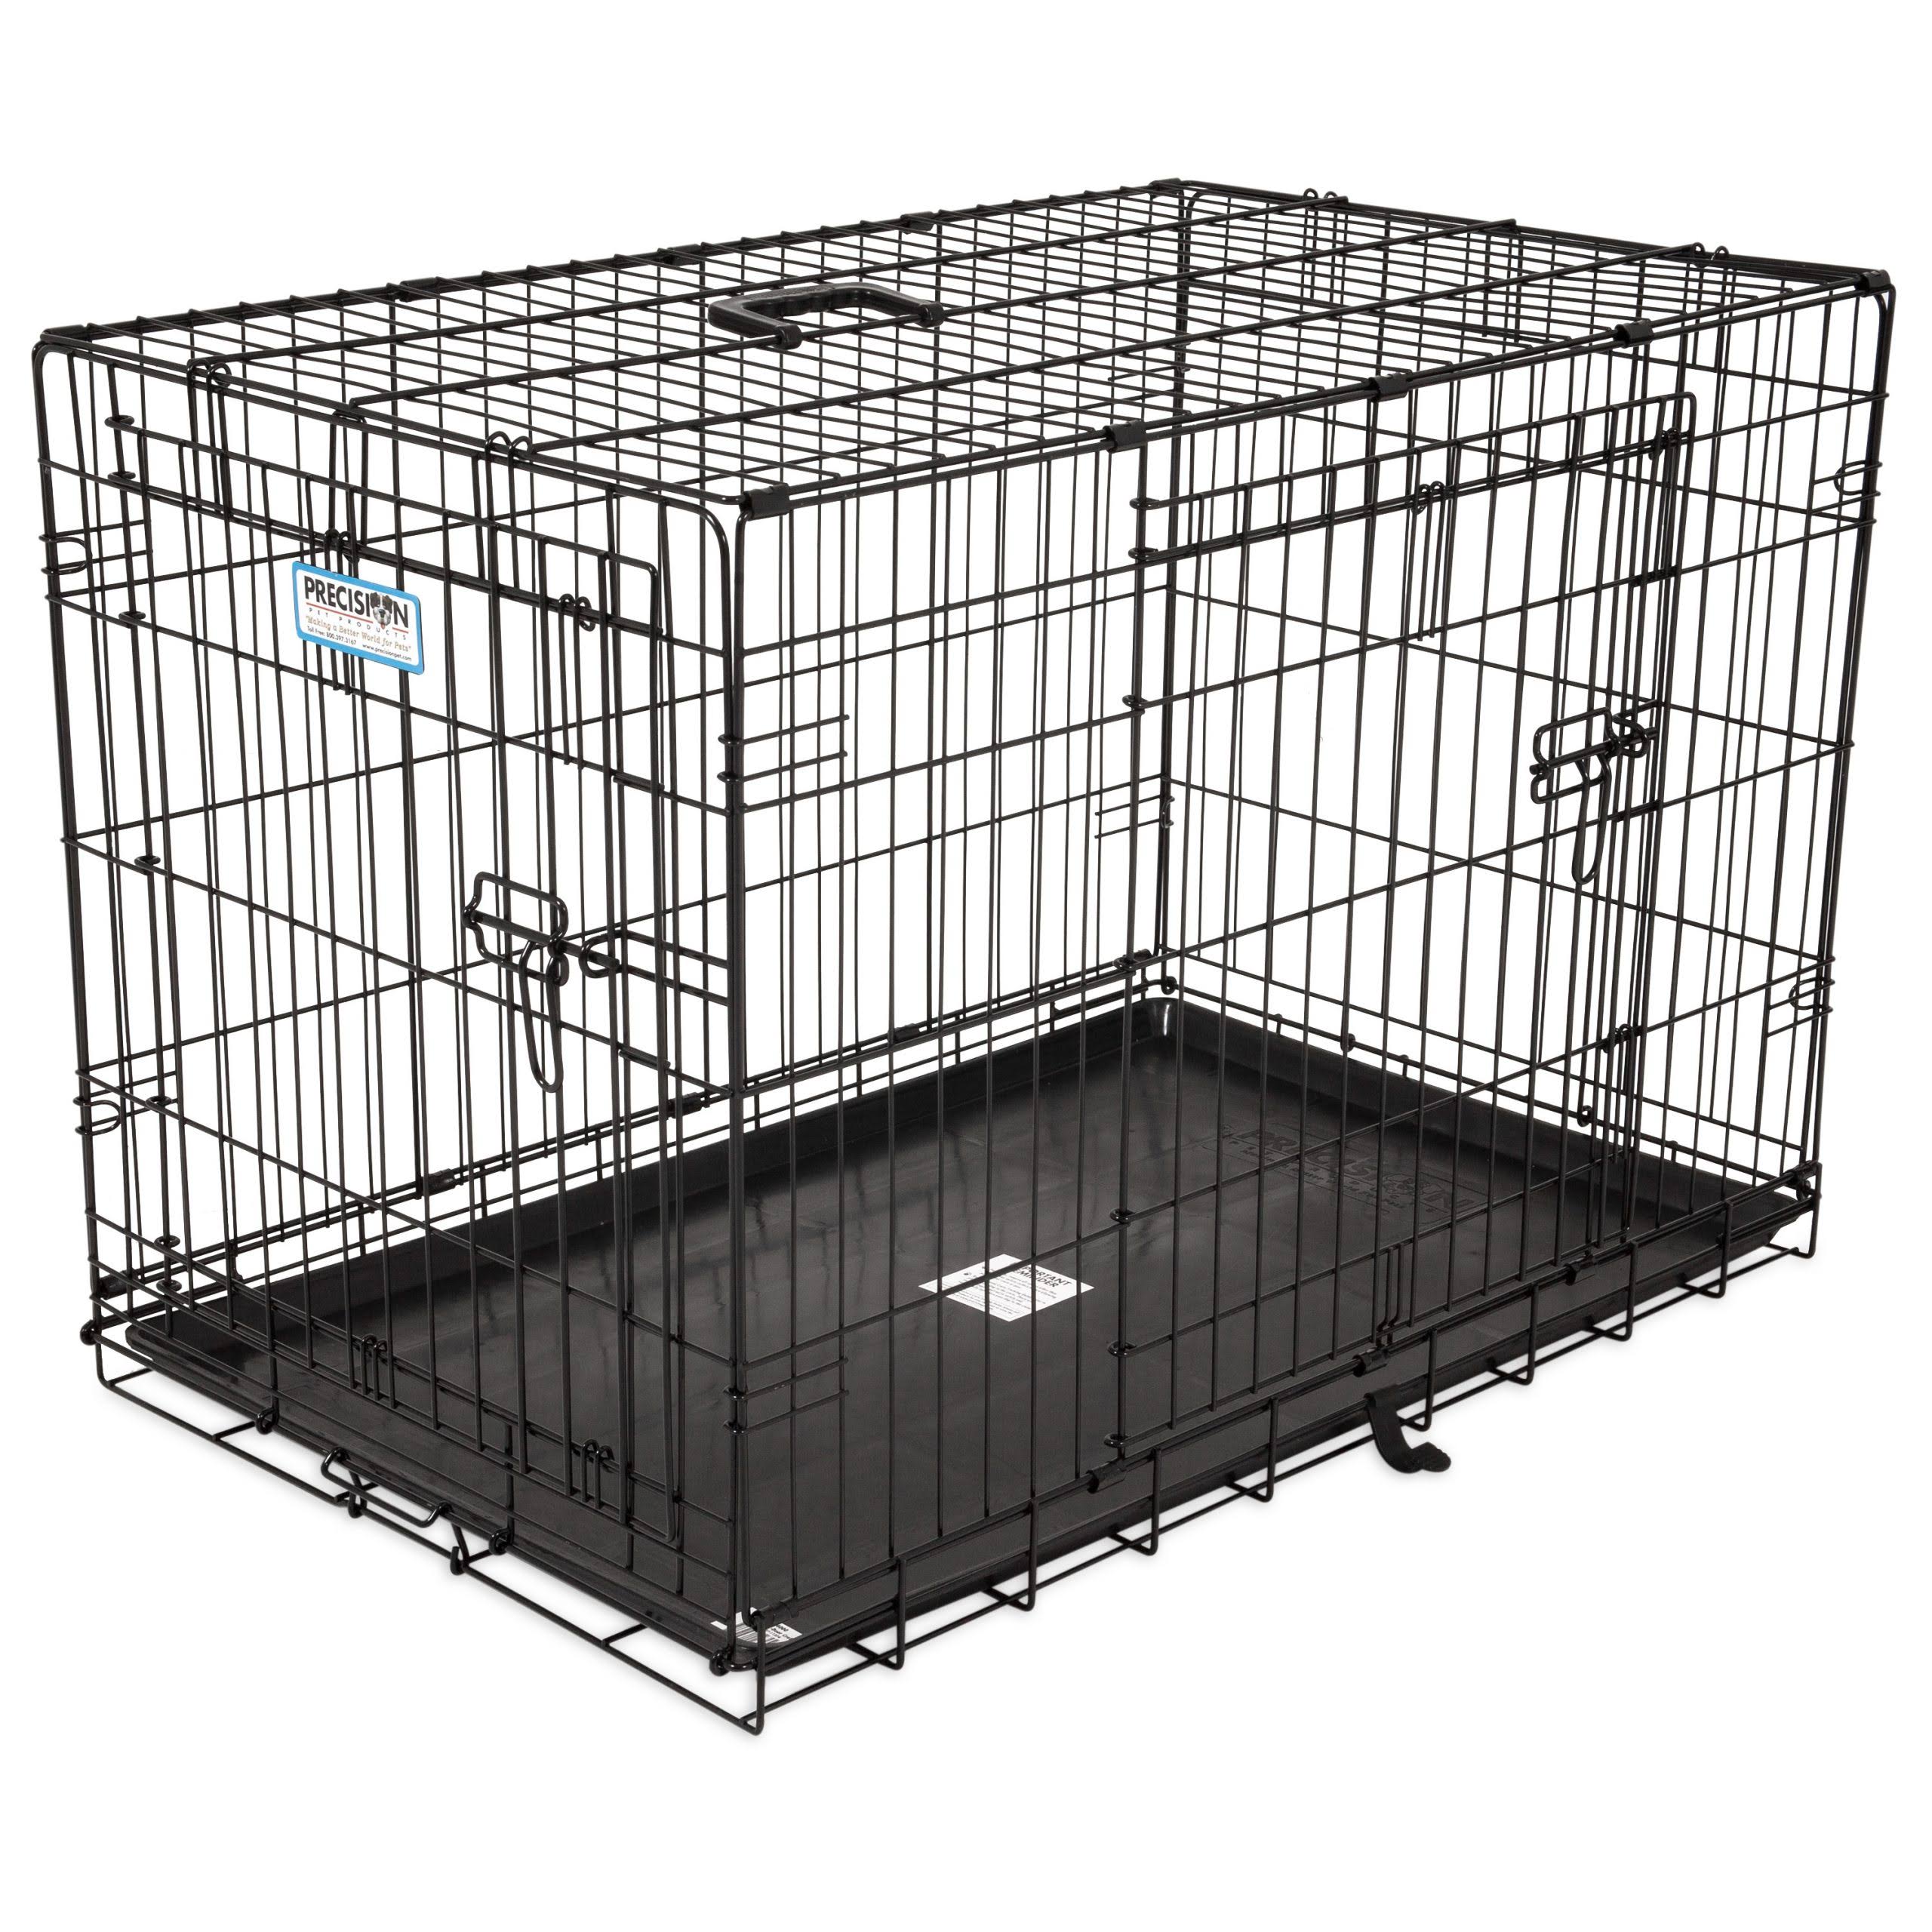 Precision Pet Products Precision Pet ProValu Great Crate Double Door Dog Crate - Black, Wire